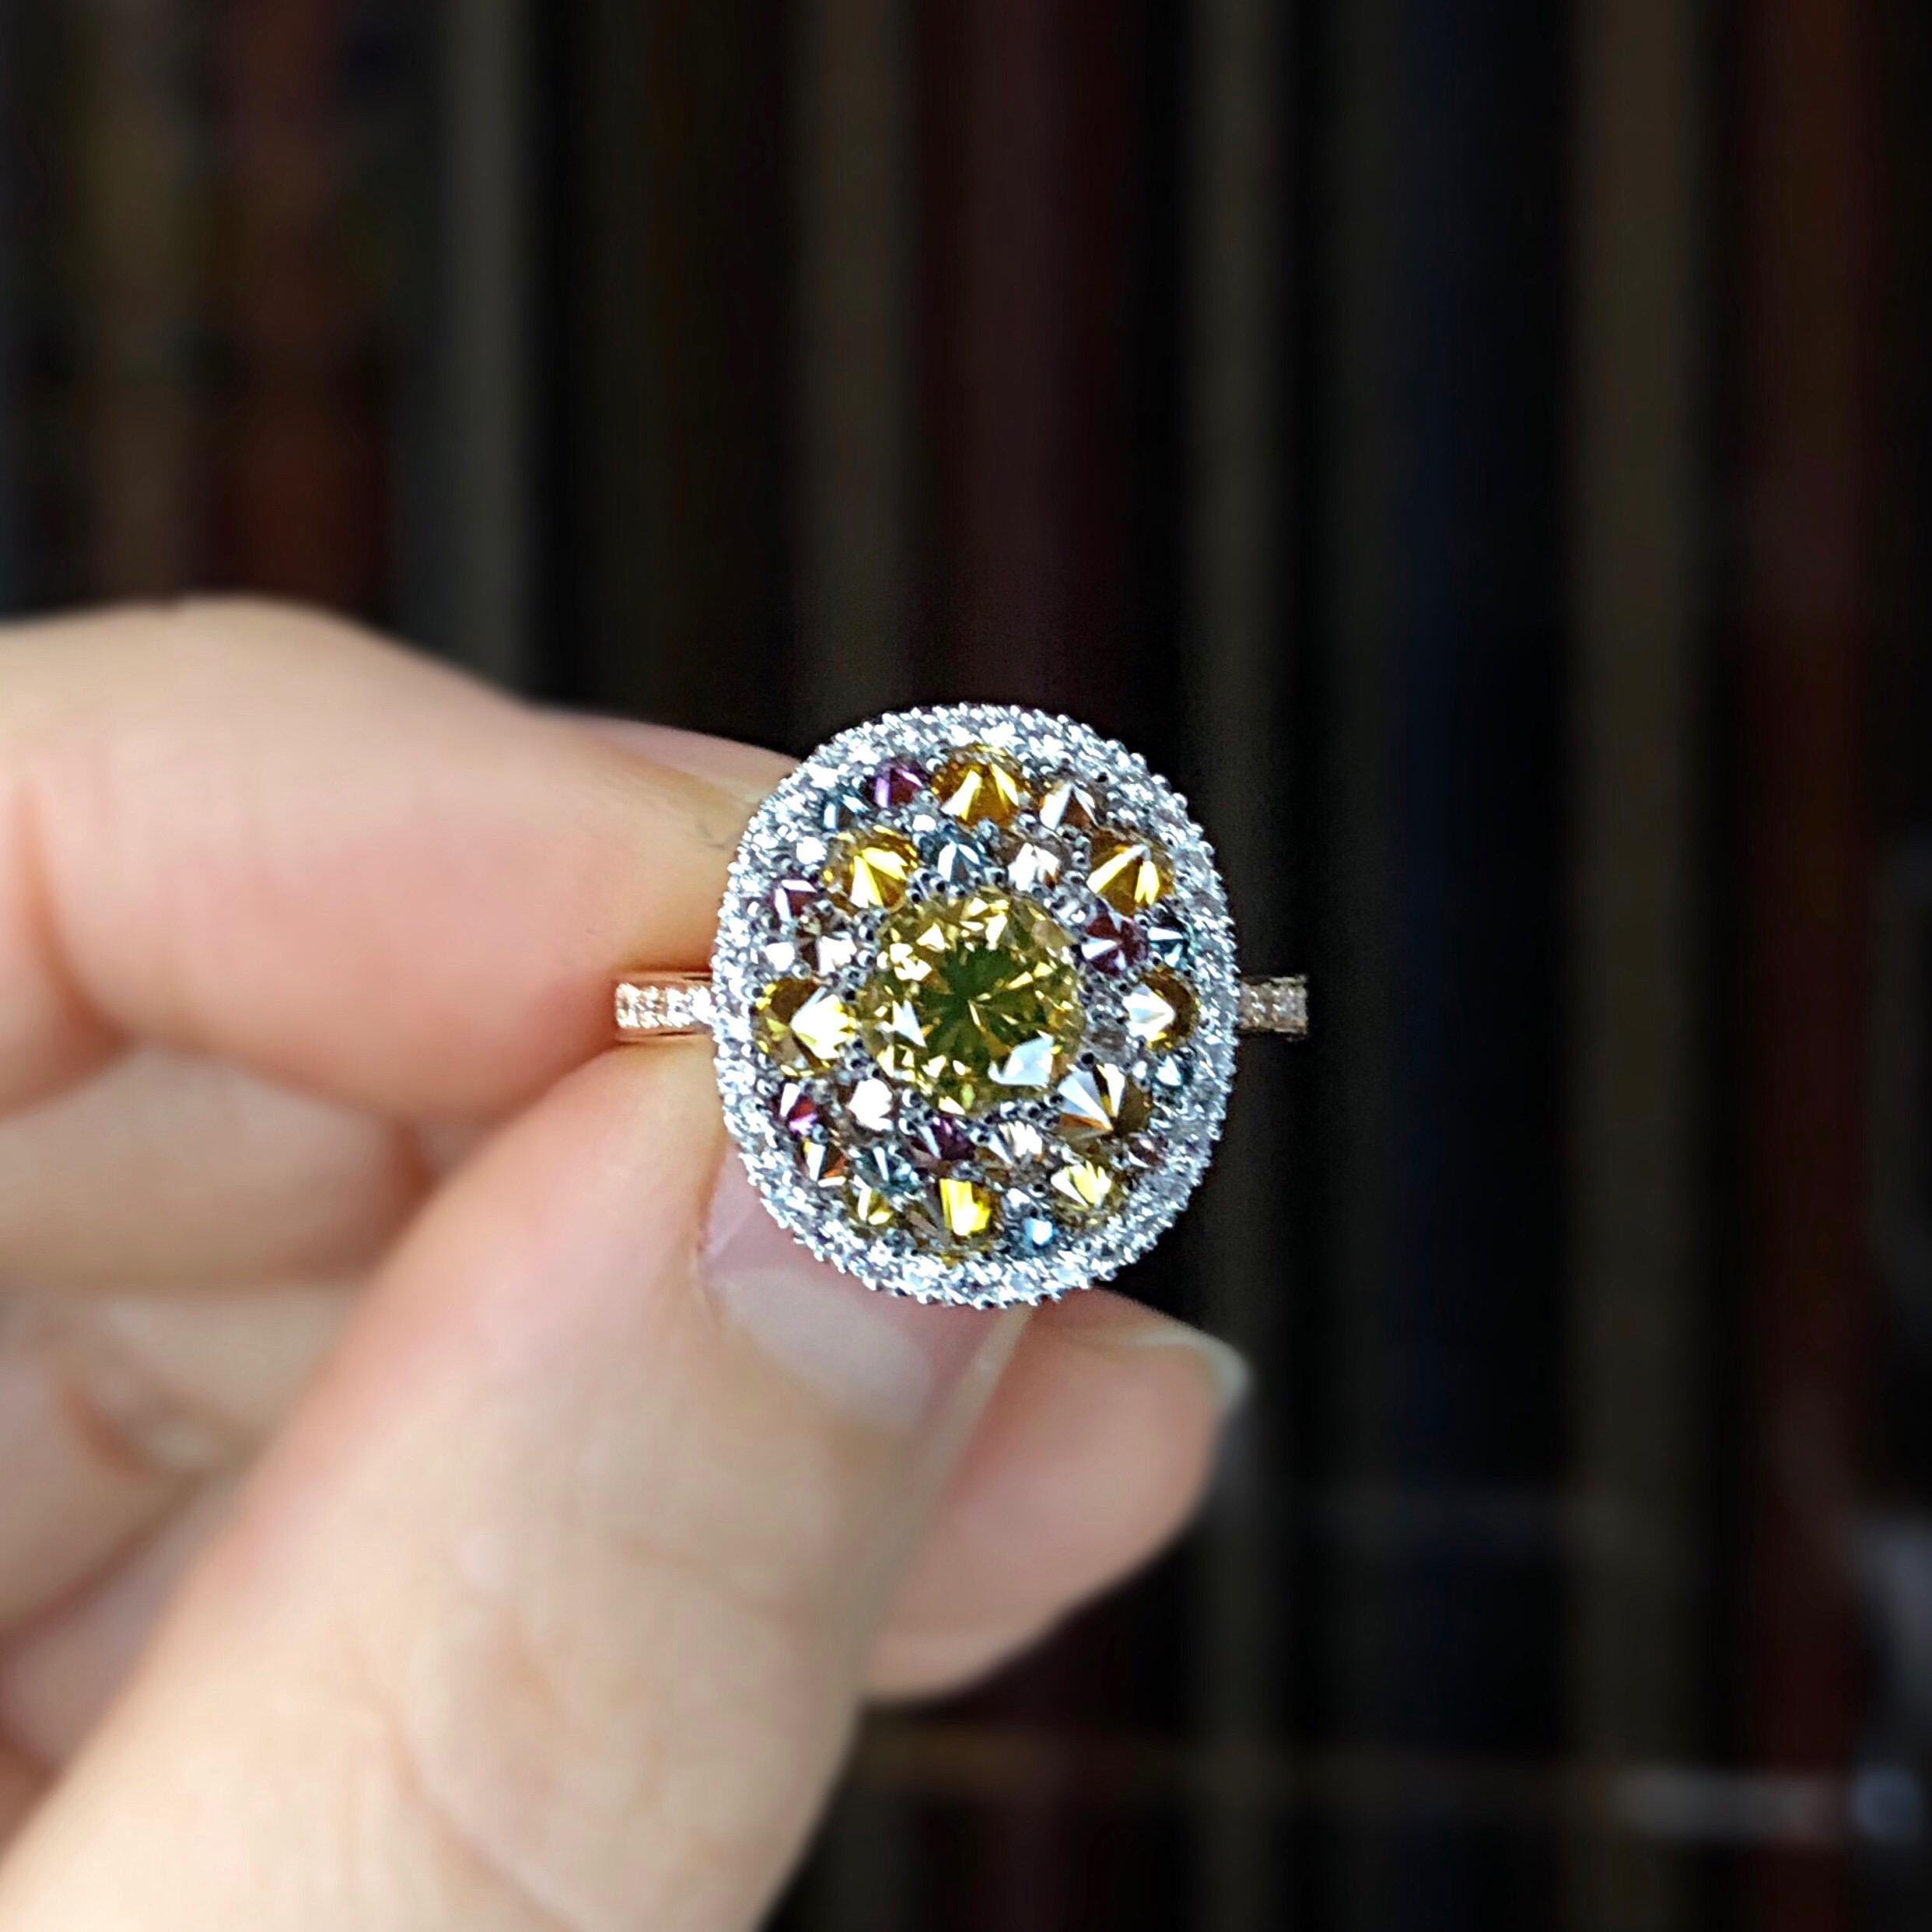 One of a kind ring in 18K Rose & White gold 7,9 g set with a fancy Cognac diamond centerstone 1,05 carat., white DEGVVS diamonds, Fancy yellow , natural coloured Blue & purple diamonds 1,36 ct. Total diamonds: 2,41 carat.
Size EU 52,5 US 6,25 . This